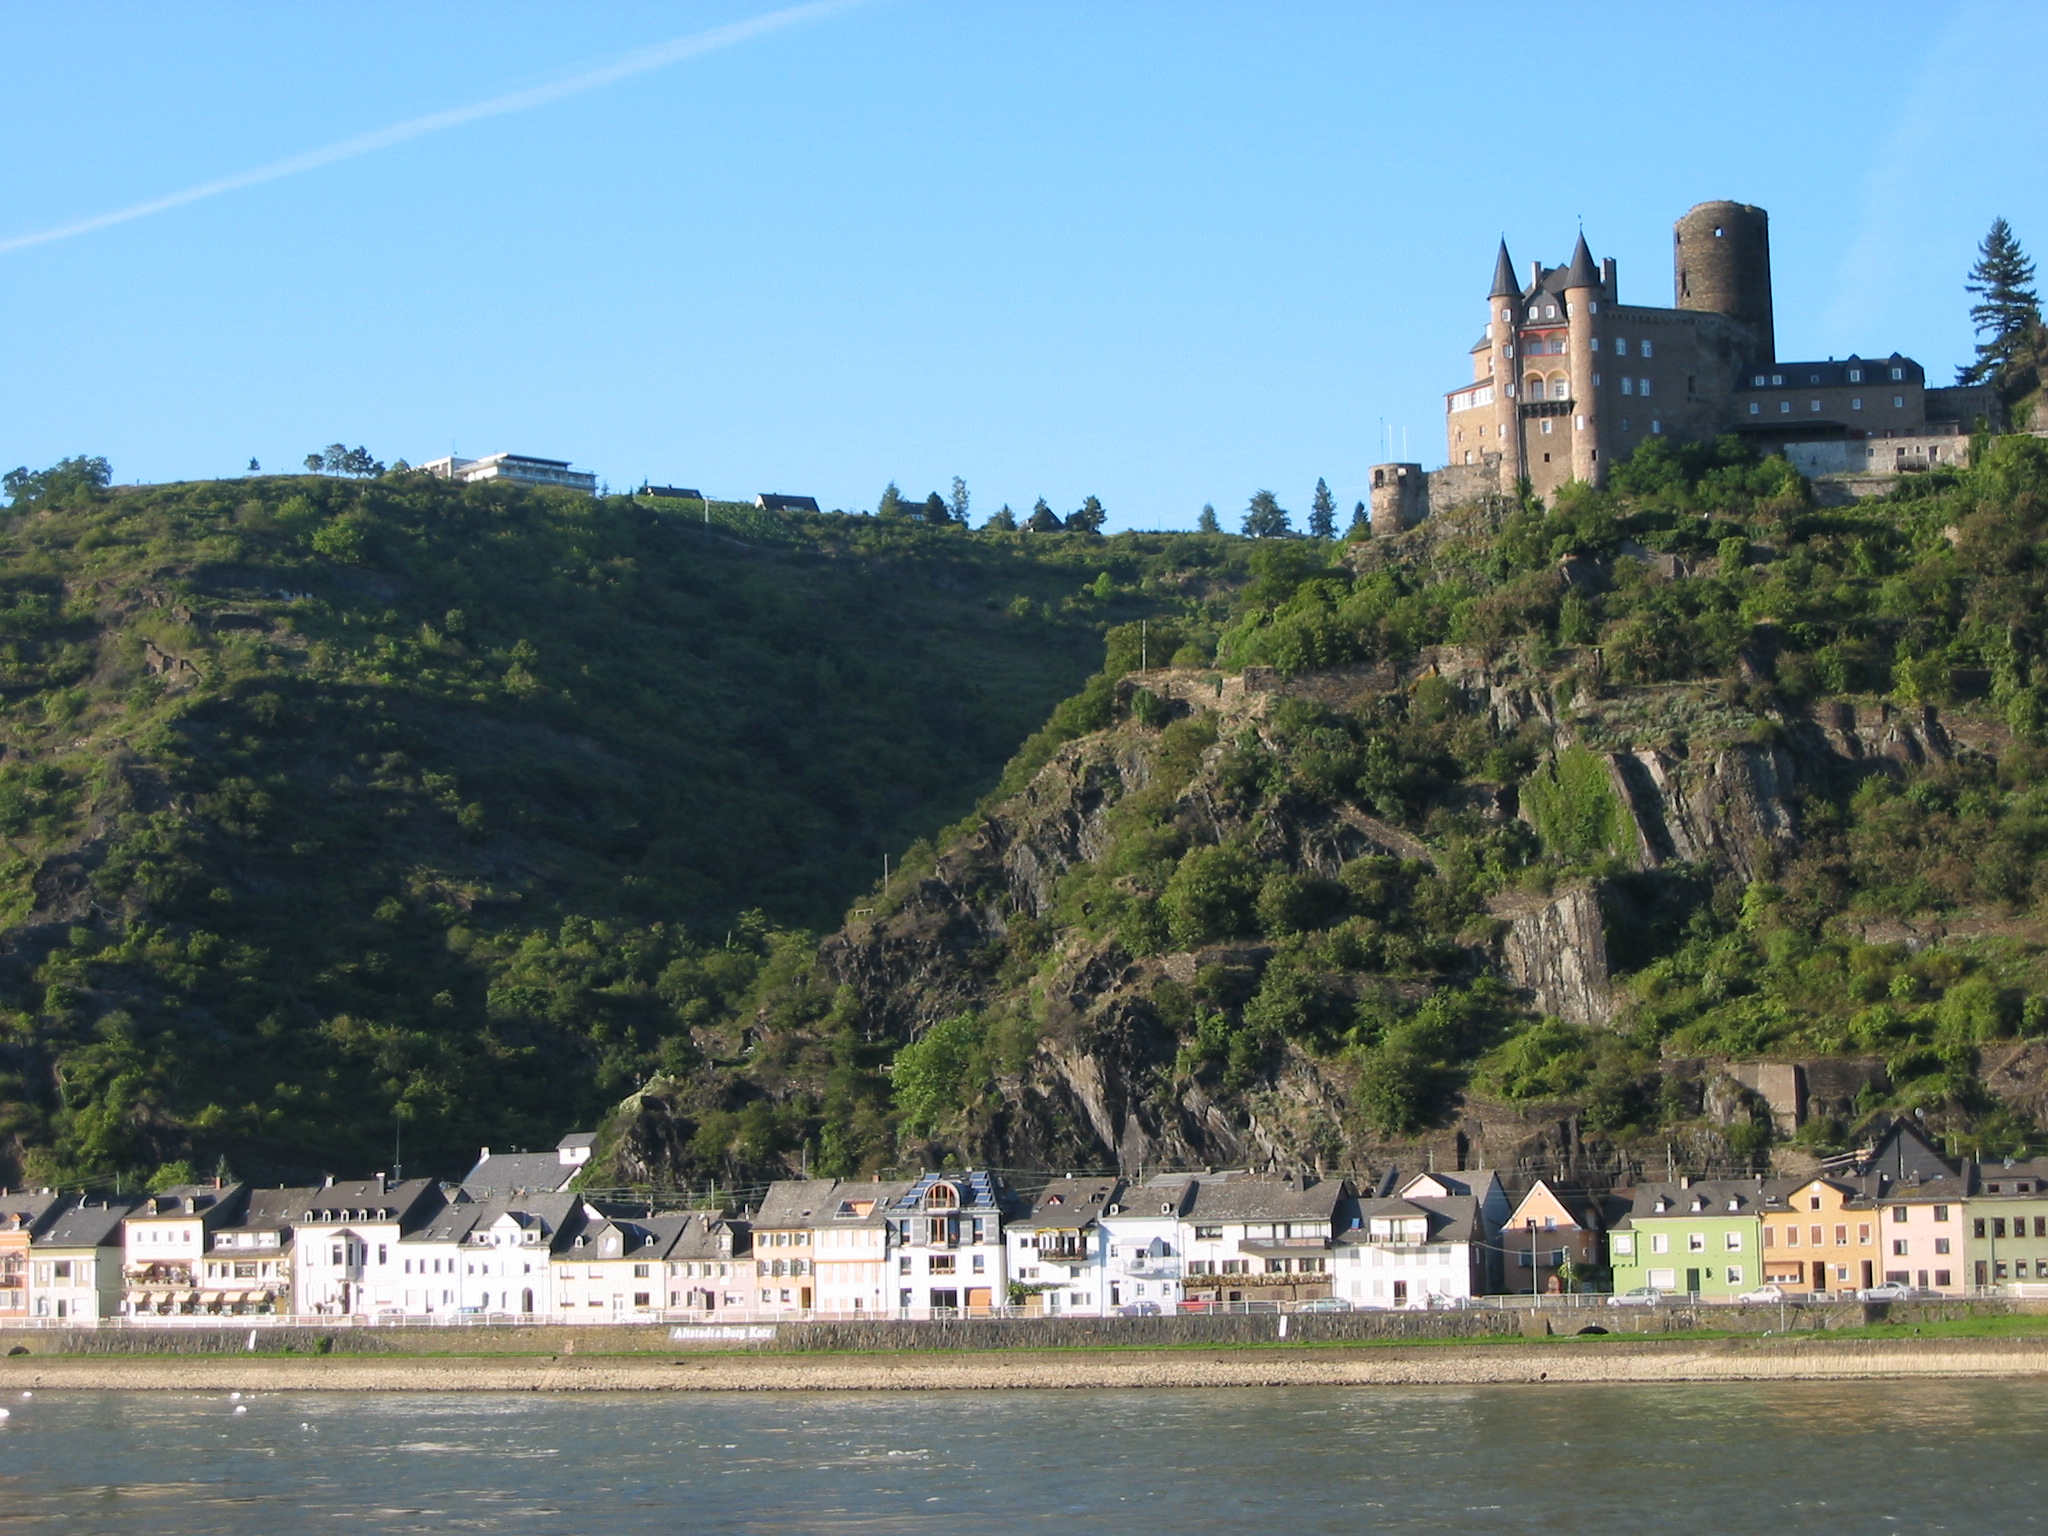 Another castle over a Rhine river city, such a treasure